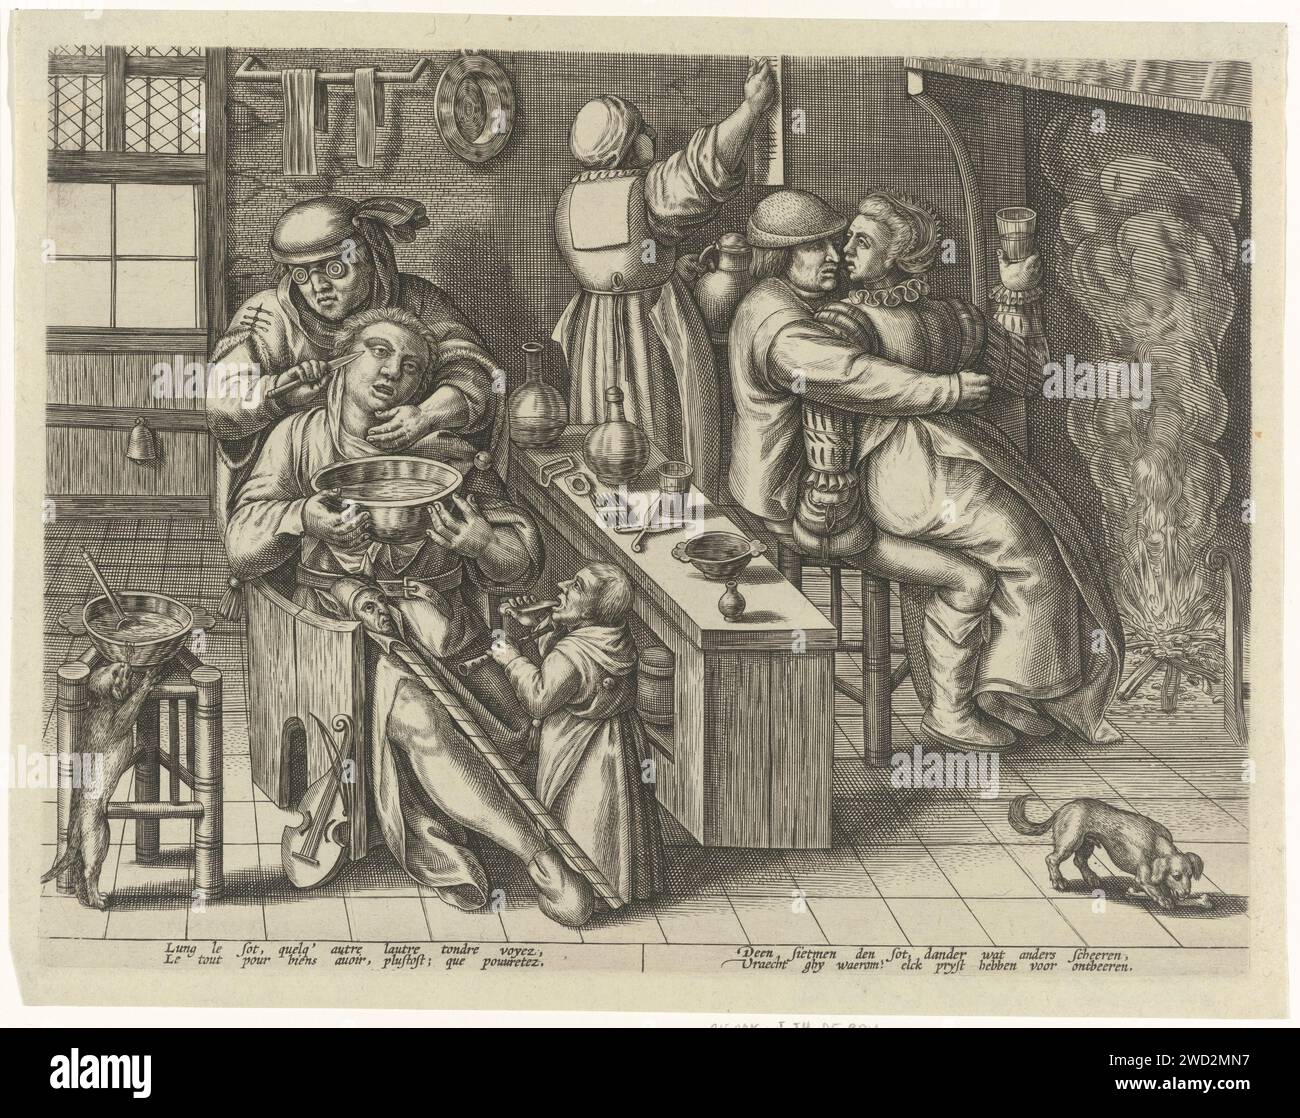 Shaving the Zot, Anonymous, 1570 - 1600 print In a departure, a woman sits on the lap of a man who hugs her in front of the fire. She holds a glass of wine in one hand, the other puts in his stock market. De Waardin keeps the notch. In the foreground, a man, who is referred to by his fool's staff as crazy or crazy, is shaved by a barber. Under the show a two -way verse in French and Dutch. 'Shaving the fool' was a common ritual in the 16th century at Narren parties: the shaving of criminals, vagabonds and crazy people, so that they were recognizable as such. Low Countries paper engraving Exist Stock Photo